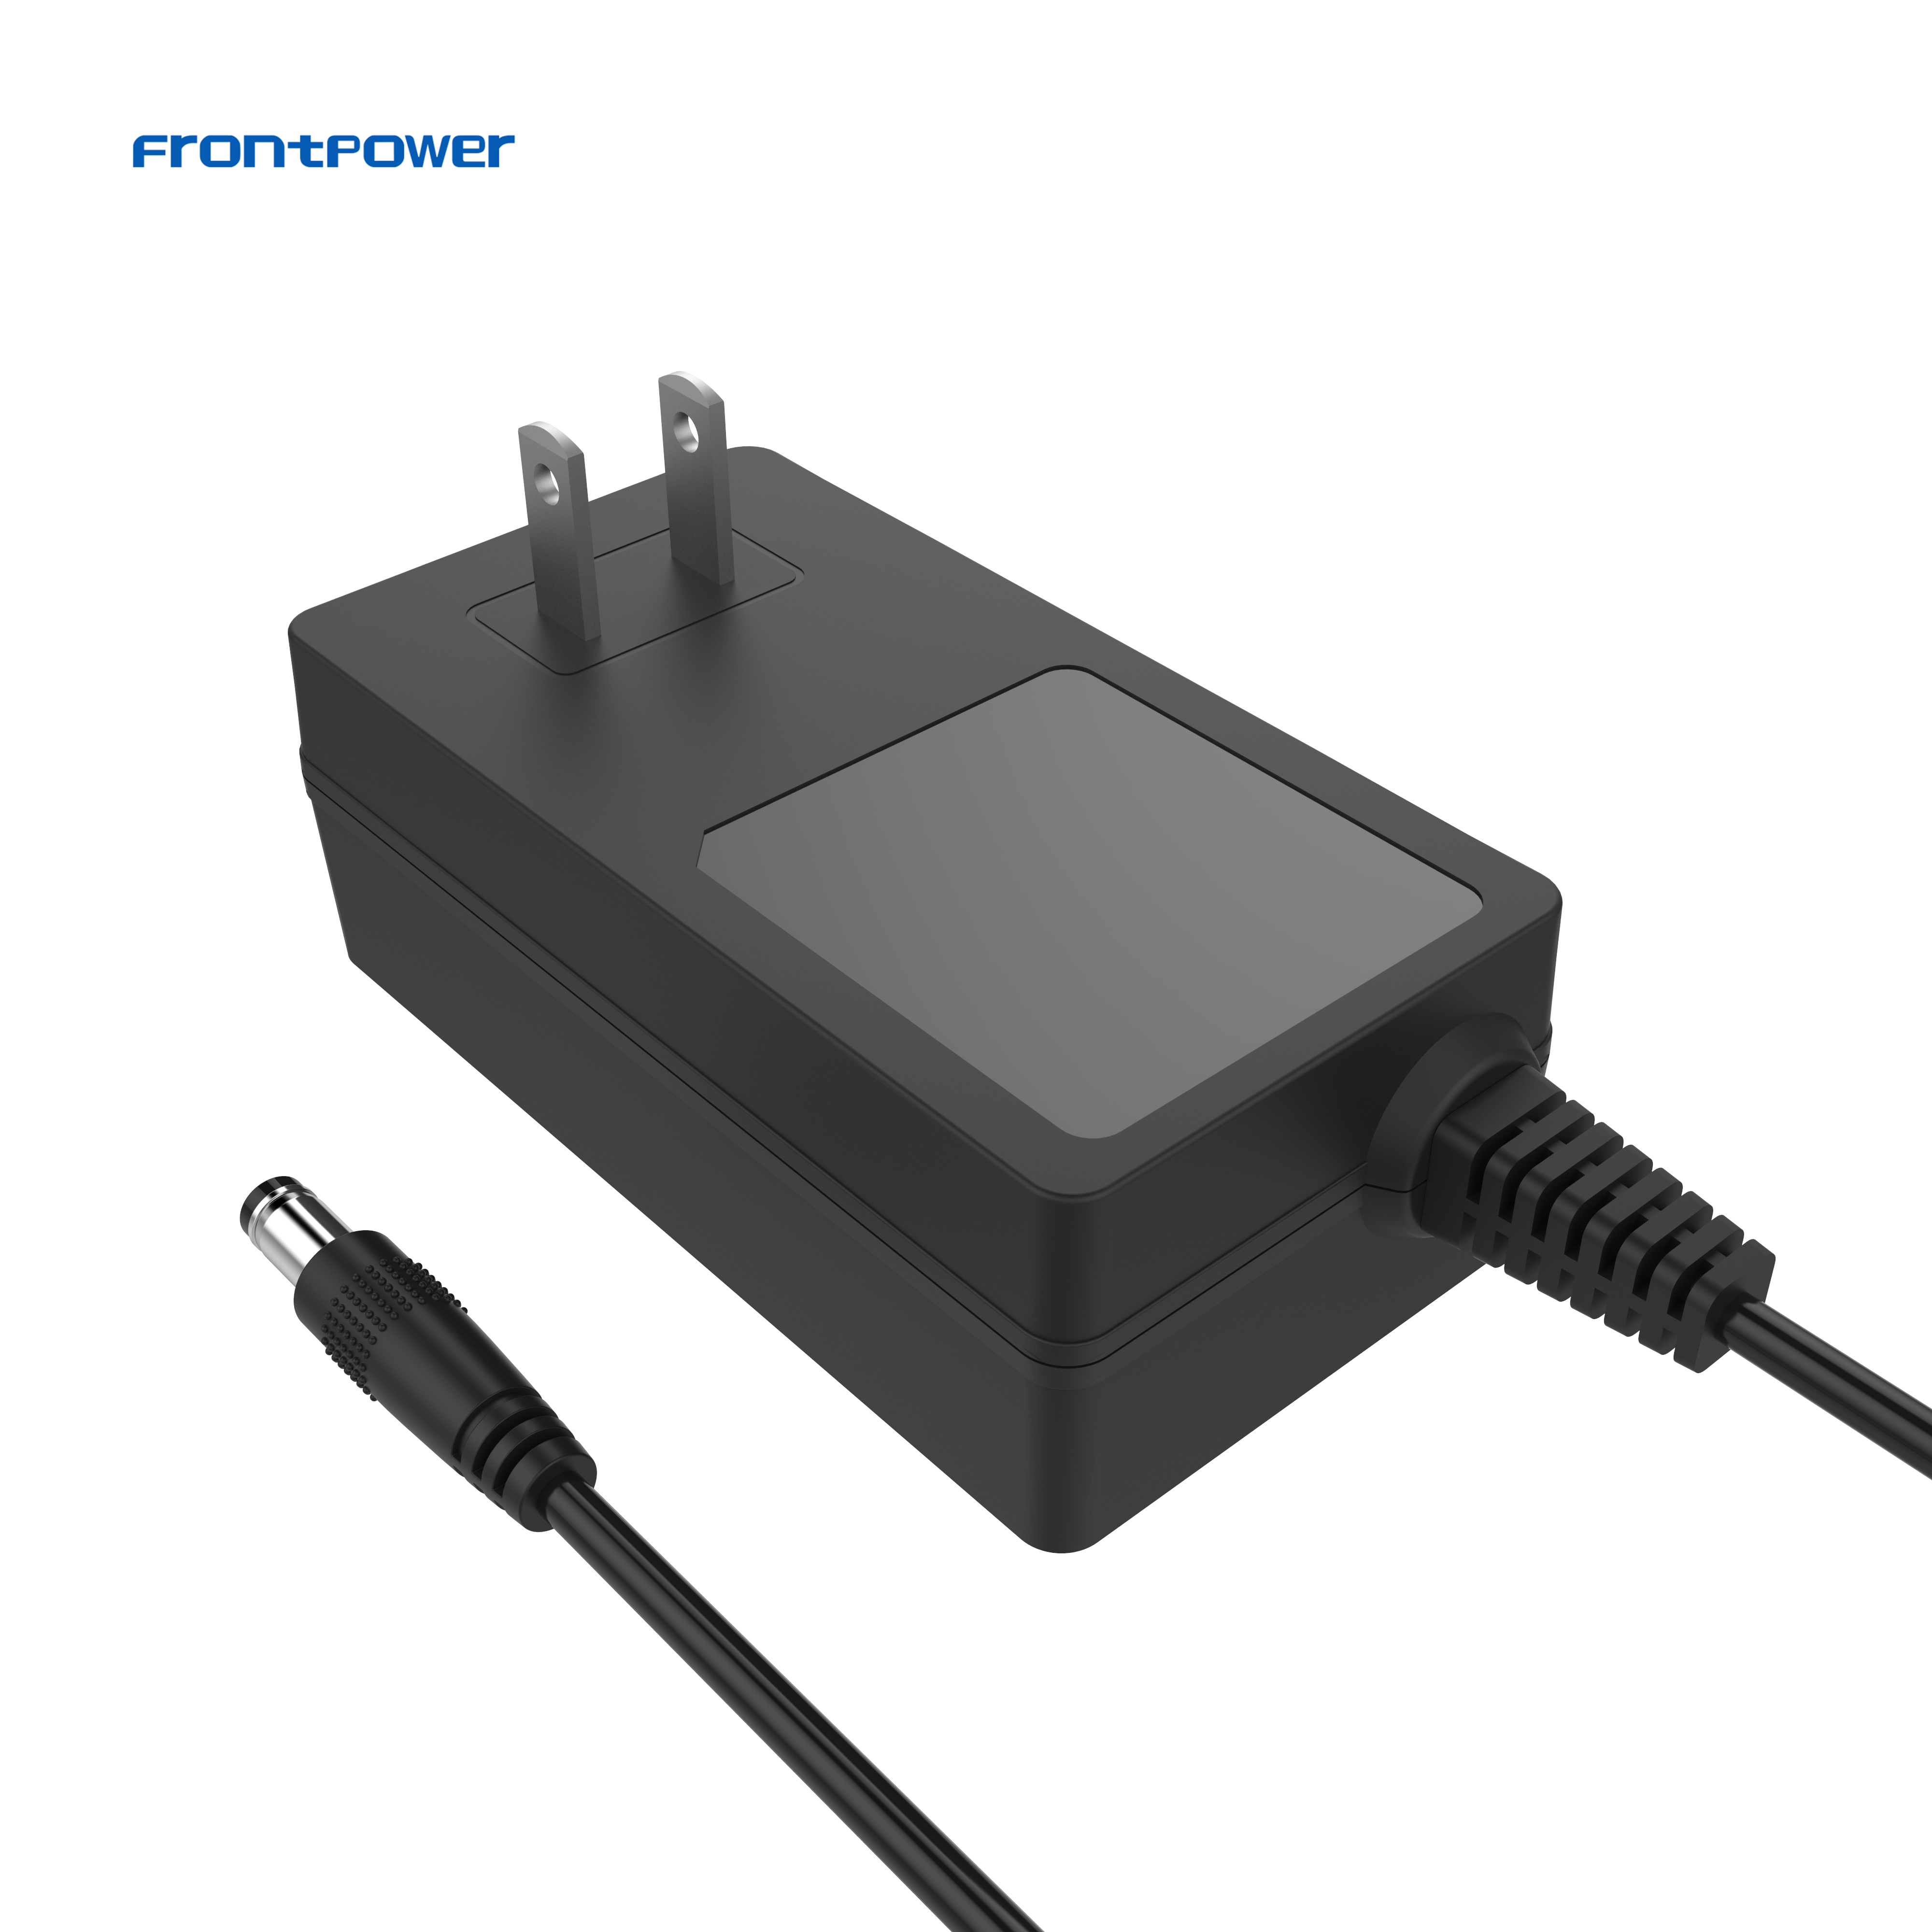 5V 9V 12V 15V 24V 1.5A 2.4A 3A 4A 5A 6A US EU UK AU PSE Plug Wall Power Adapter ACDC Charger SMPS Switching Power Supply for POS